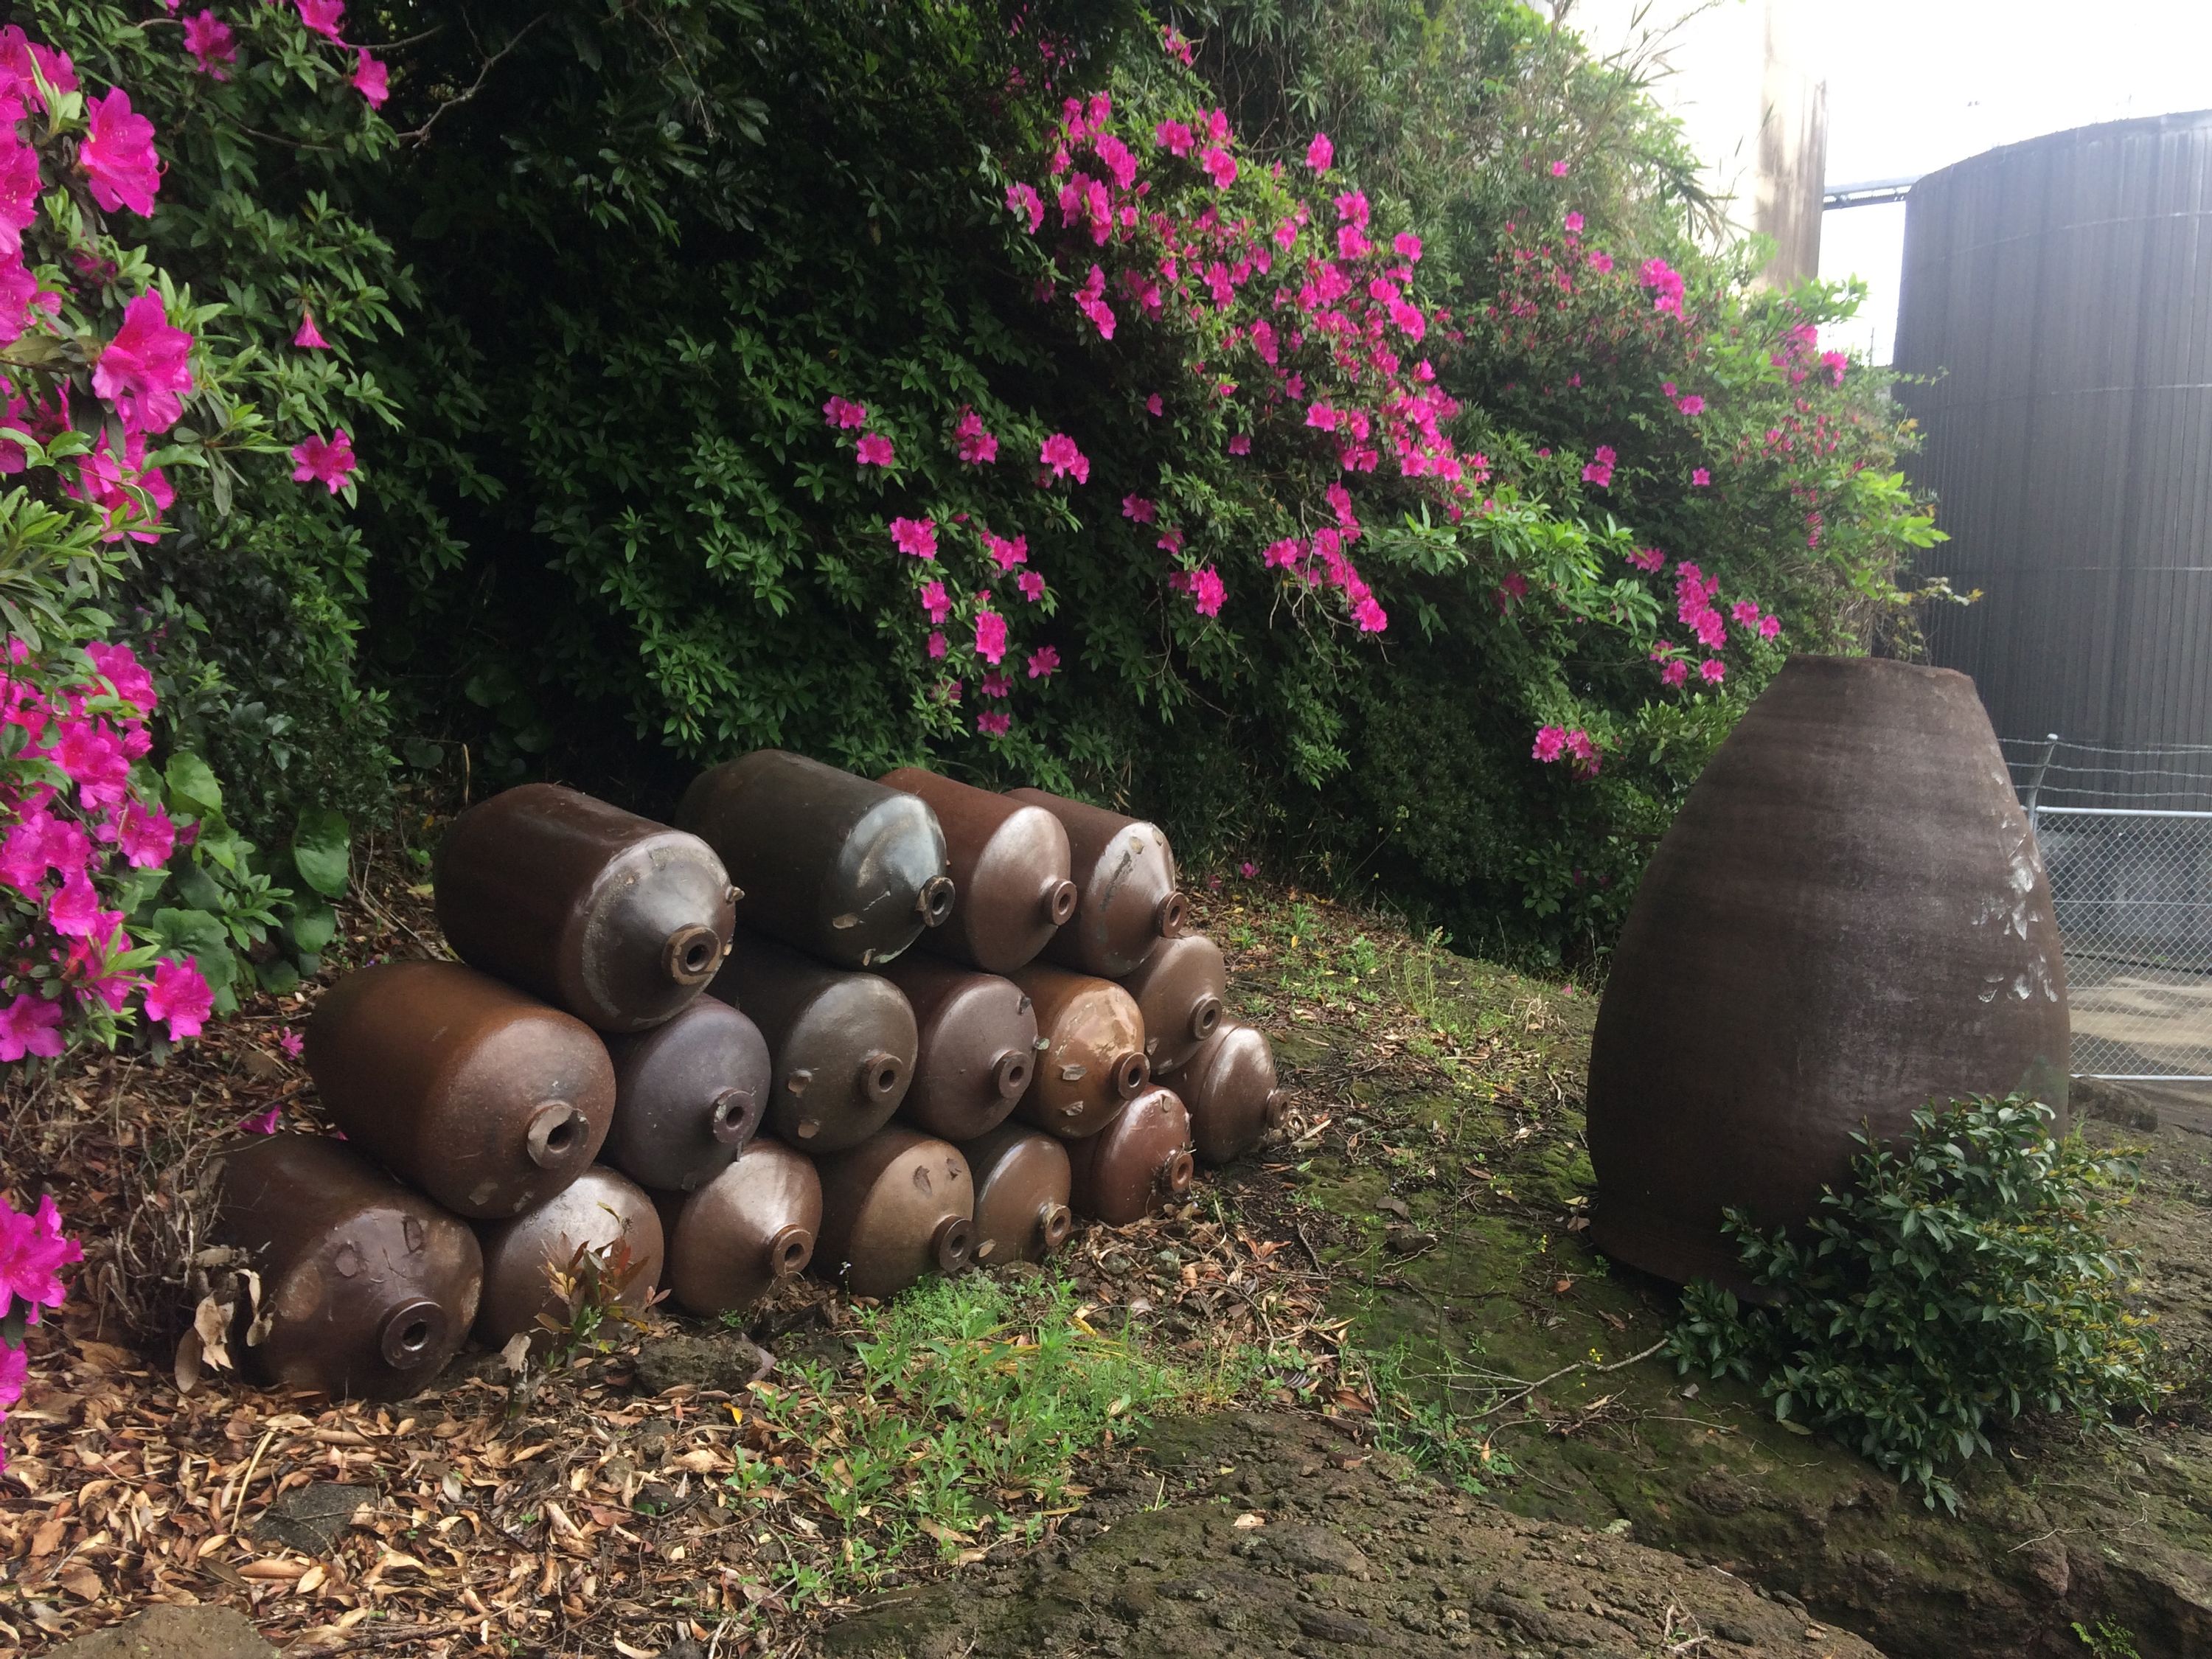 Large ceramic barrels of shōchū outside a brewery, in front of flowering rhododendrons.